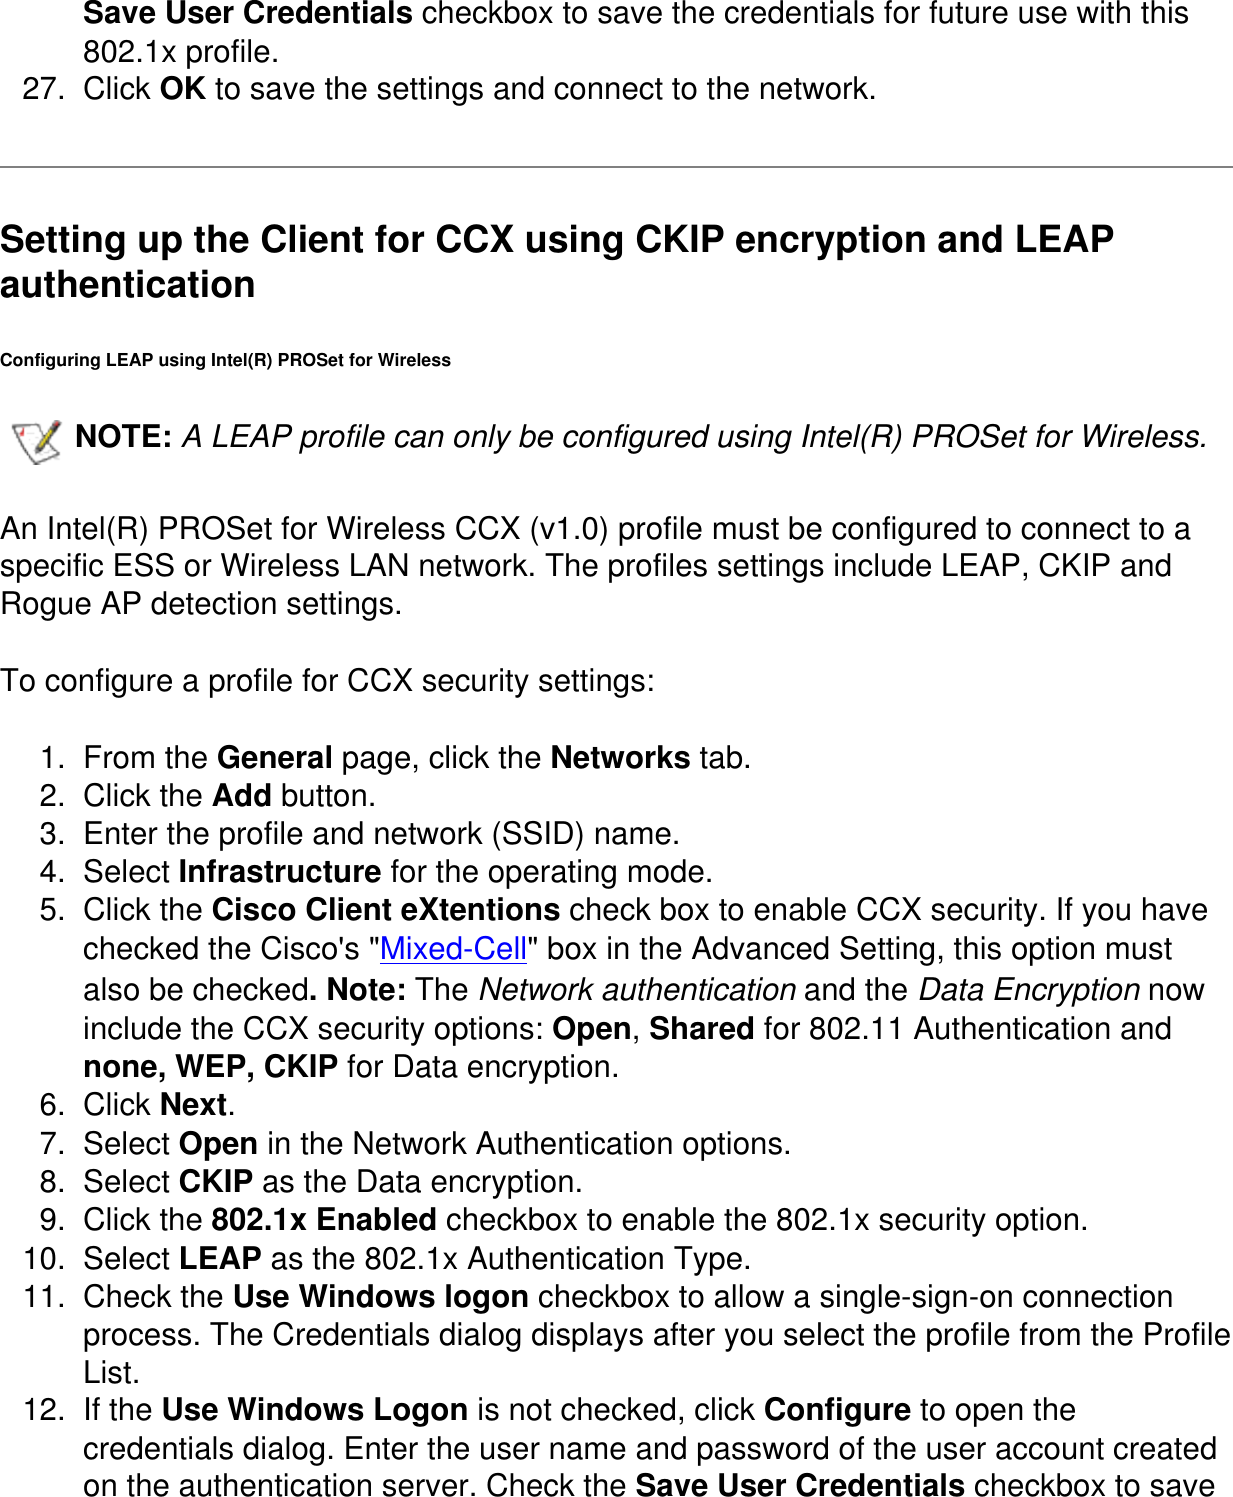 Save User Credentials checkbox to save the credentials for future use with this 802.1x profile.27.  Click OK to save the settings and connect to the network.Setting up the Client for CCX using CKIP encryption and LEAP authentication Configuring LEAP using Intel(R) PROSet for WirelessNOTE: A LEAP profile can only be configured using Intel(R) PROSet for Wireless.   An Intel(R) PROSet for Wireless CCX (v1.0) profile must be configured to connect to a specific ESS or Wireless LAN network. The profiles settings include LEAP, CKIP and Rogue AP detection settings. To configure a profile for CCX security settings:1.  From the General page, click the Networks tab. 2.  Click the Add button. 3.  Enter the profile and network (SSID) name. 4.  Select Infrastructure for the operating mode. 5.  Click the Cisco Client eXtentions check box to enable CCX security. If you have checked the Cisco&apos;s &quot;Mixed-Cell&quot; box in the Advanced Setting, this option must also be checked. Note: The Network authentication and the Data Encryption now include the CCX security options: Open, Shared for 802.11 Authentication and none, WEP, CKIP for Data encryption. 6.  Click Next.7.  Select Open in the Network Authentication options.8.  Select CKIP as the Data encryption. 9.  Click the 802.1x Enabled checkbox to enable the 802.1x security option. 10.  Select LEAP as the 802.1x Authentication Type. 11.  Check the Use Windows logon checkbox to allow a single-sign-on connection process. The Credentials dialog displays after you select the profile from the Profile List.12.  If the Use Windows Logon is not checked, click Configure to open the credentials dialog. Enter the user name and password of the user account created on the authentication server. Check the Save User Credentials checkbox to save 